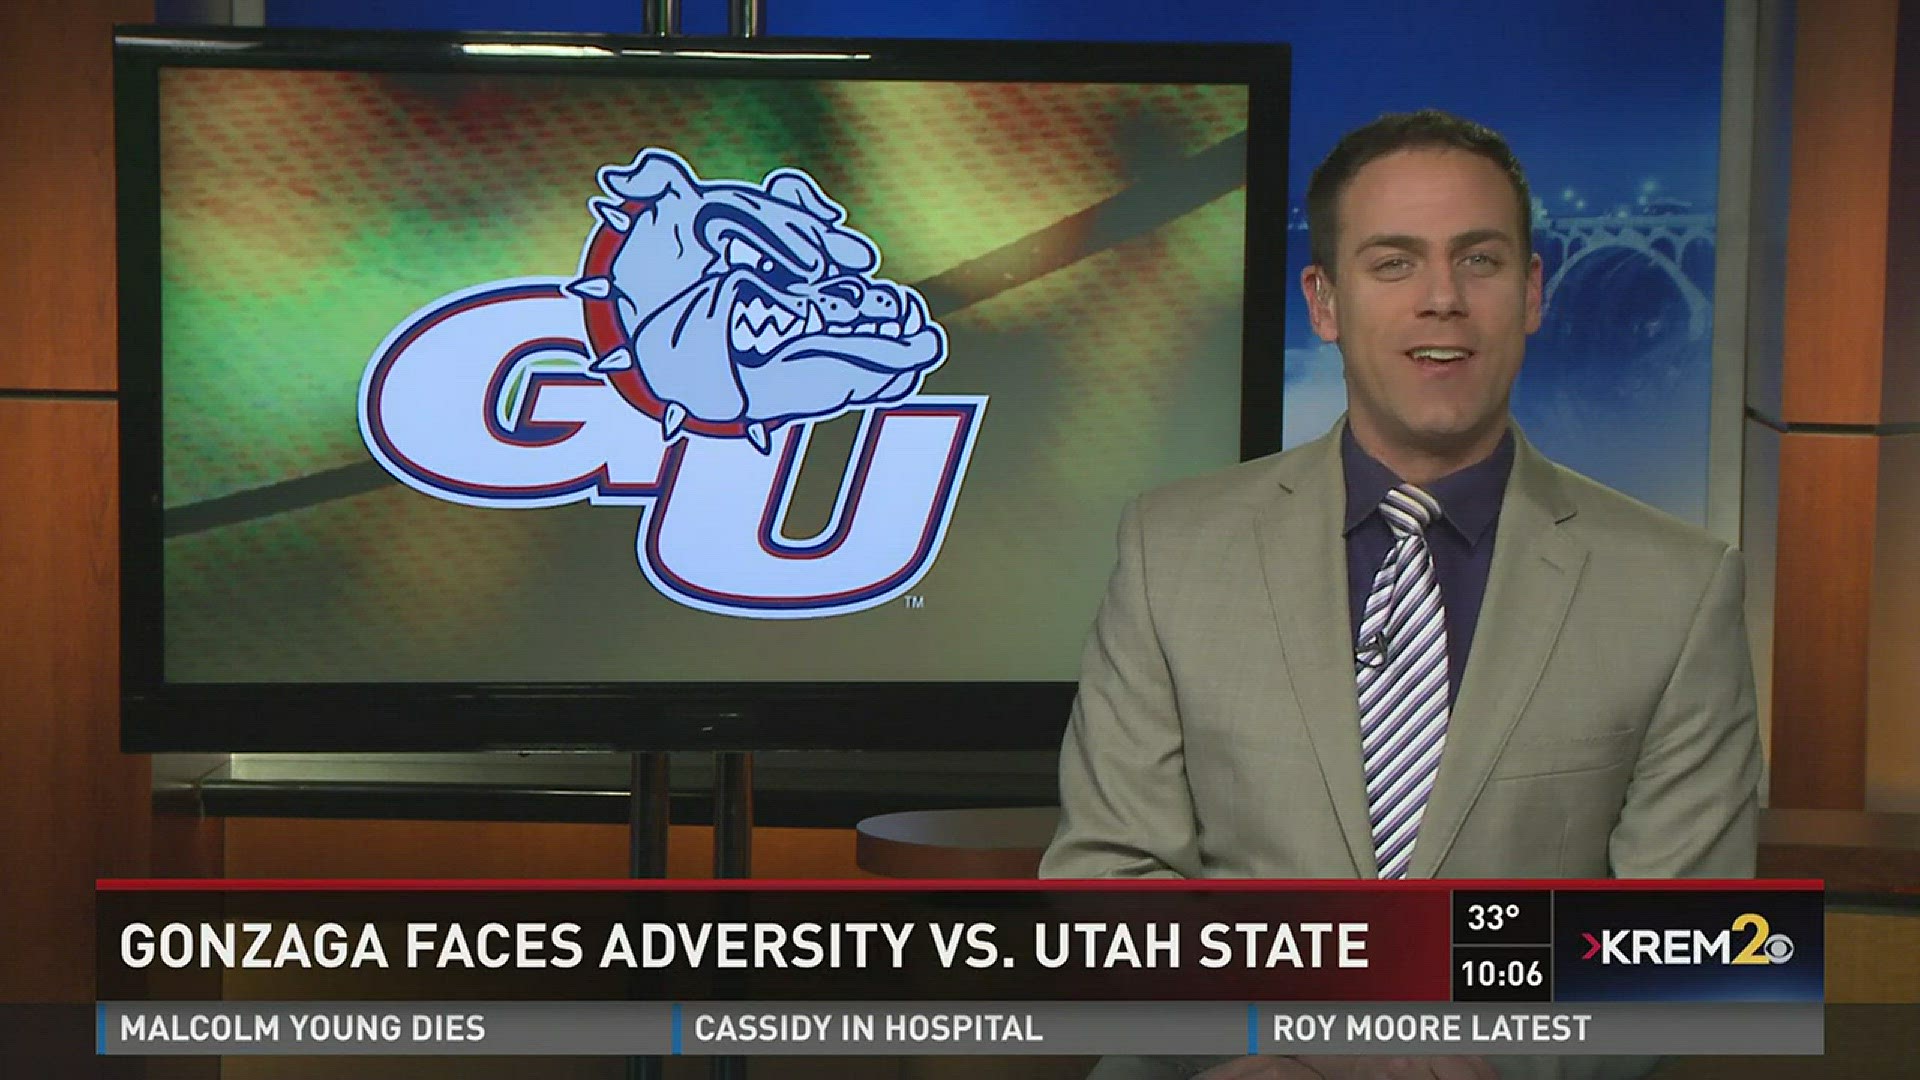 It wasn't easy, but the Zags take down Utah State 79-66 at the Kennel on Saturday.